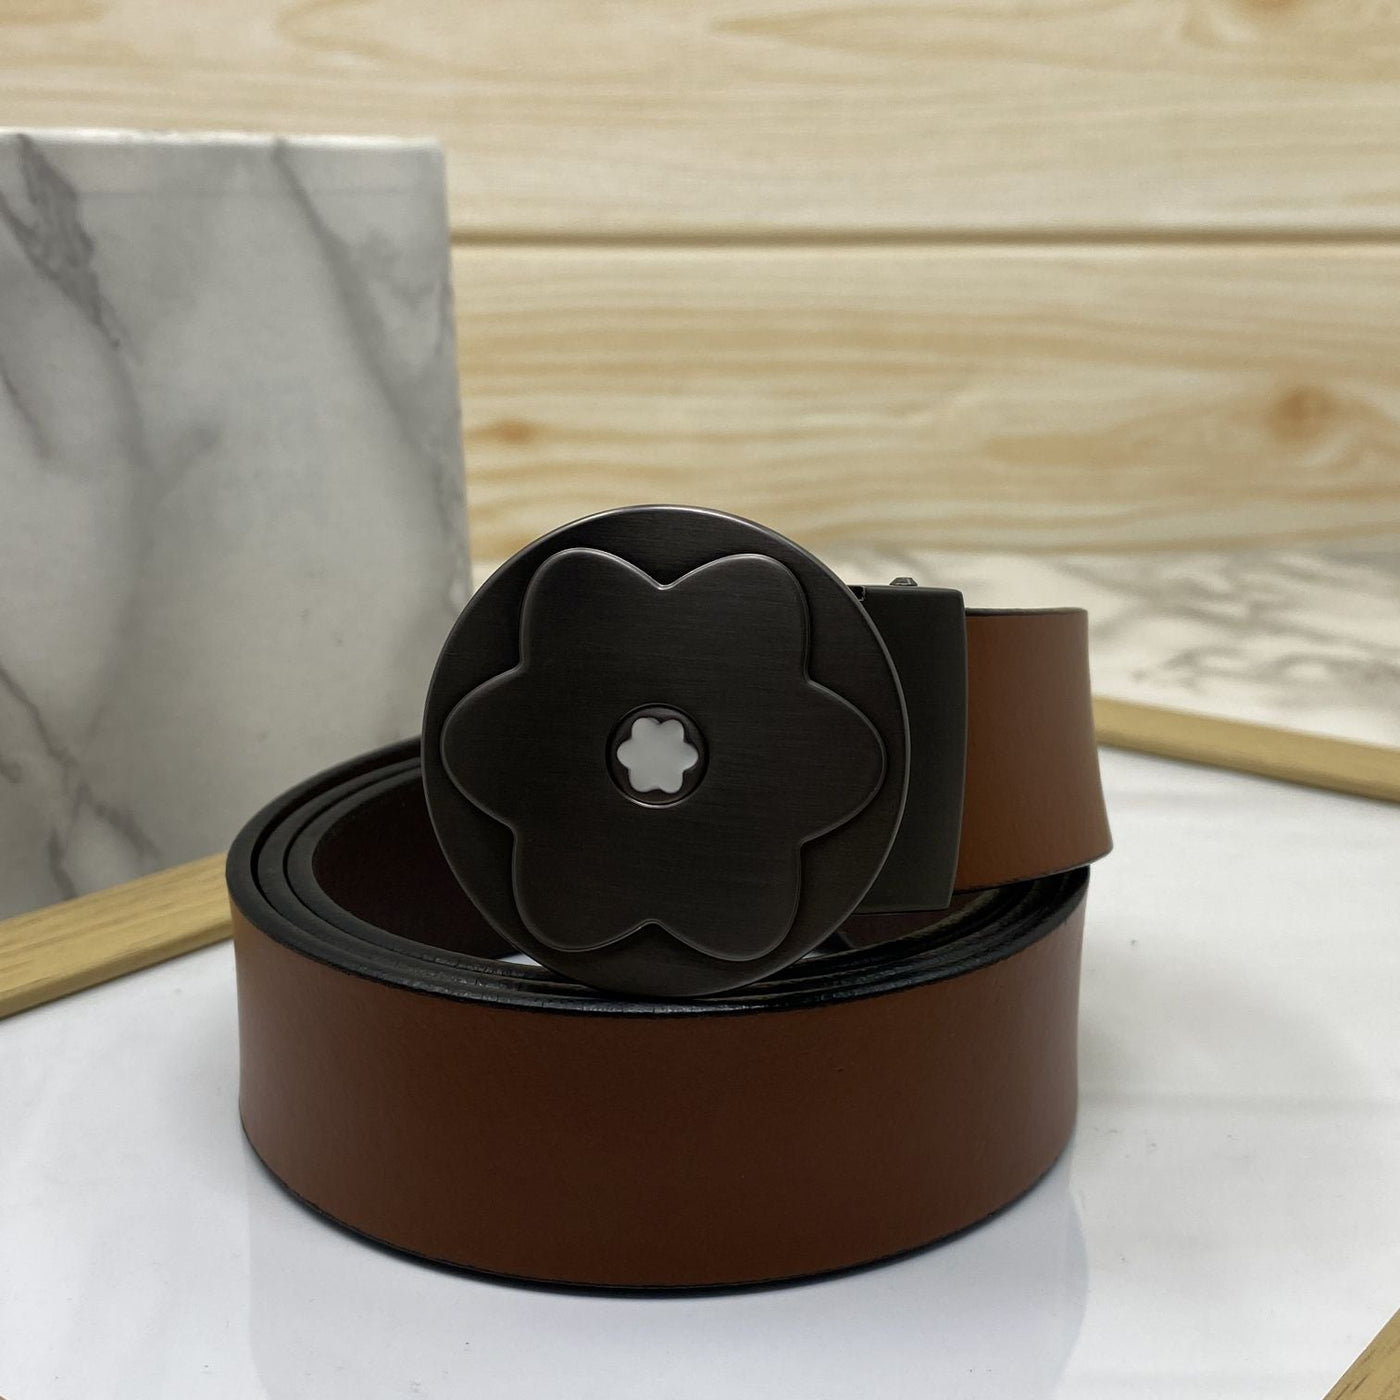 Flower Pattern Round Pin Buckle Leather Belt For Men-UniqueandClassy